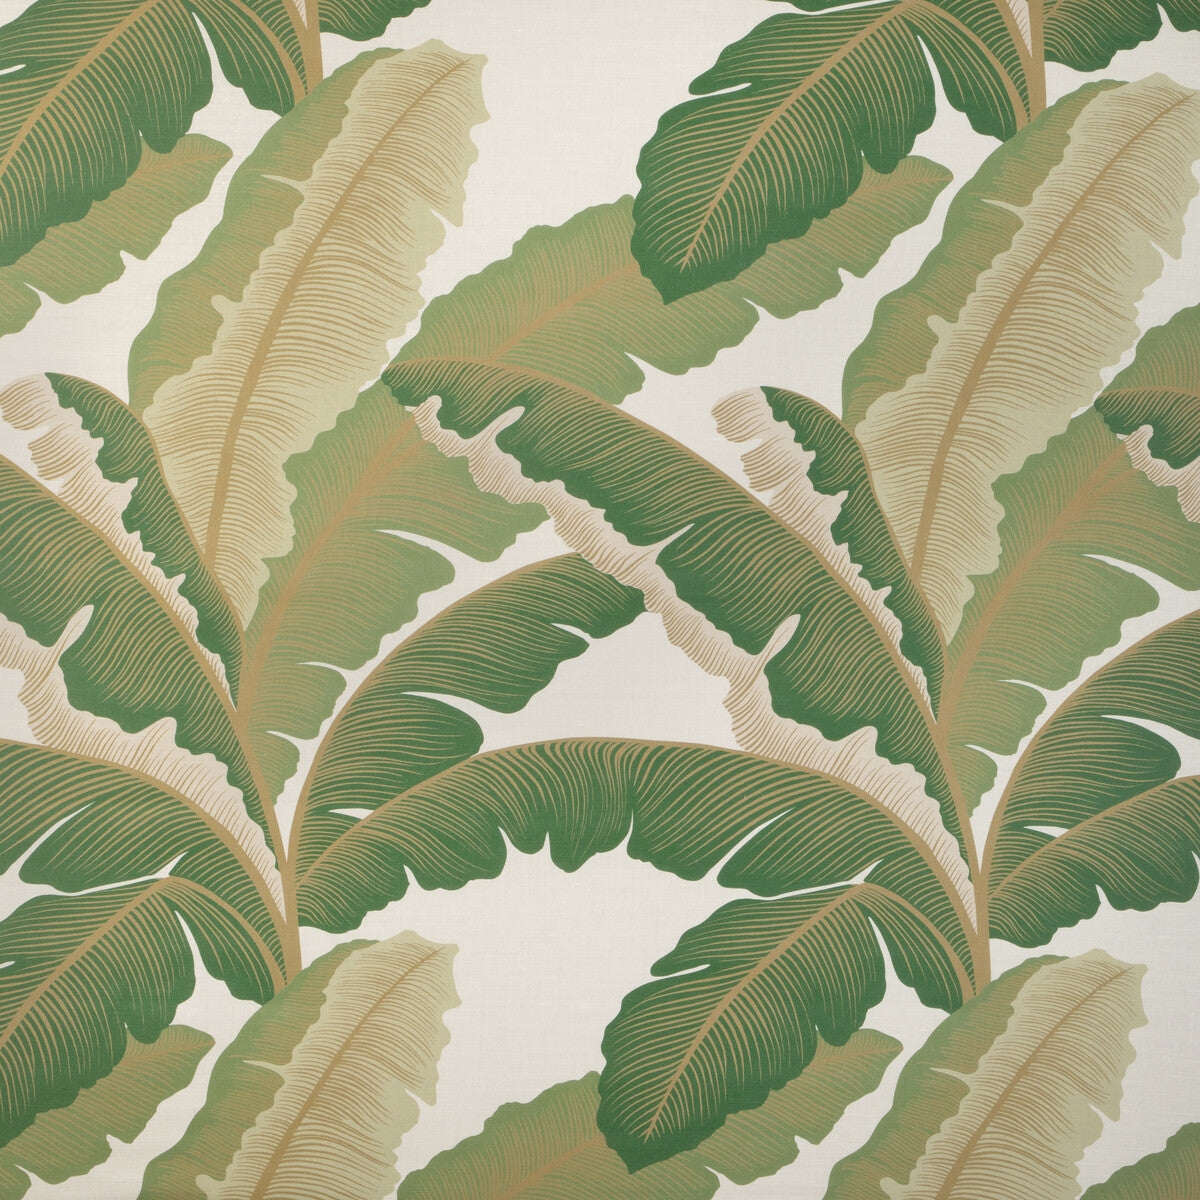 Isla Royal fabric in golden palm color - pattern ISLA ROYAL.430.0 - by Kravet Couture in the Casa Botanica collection